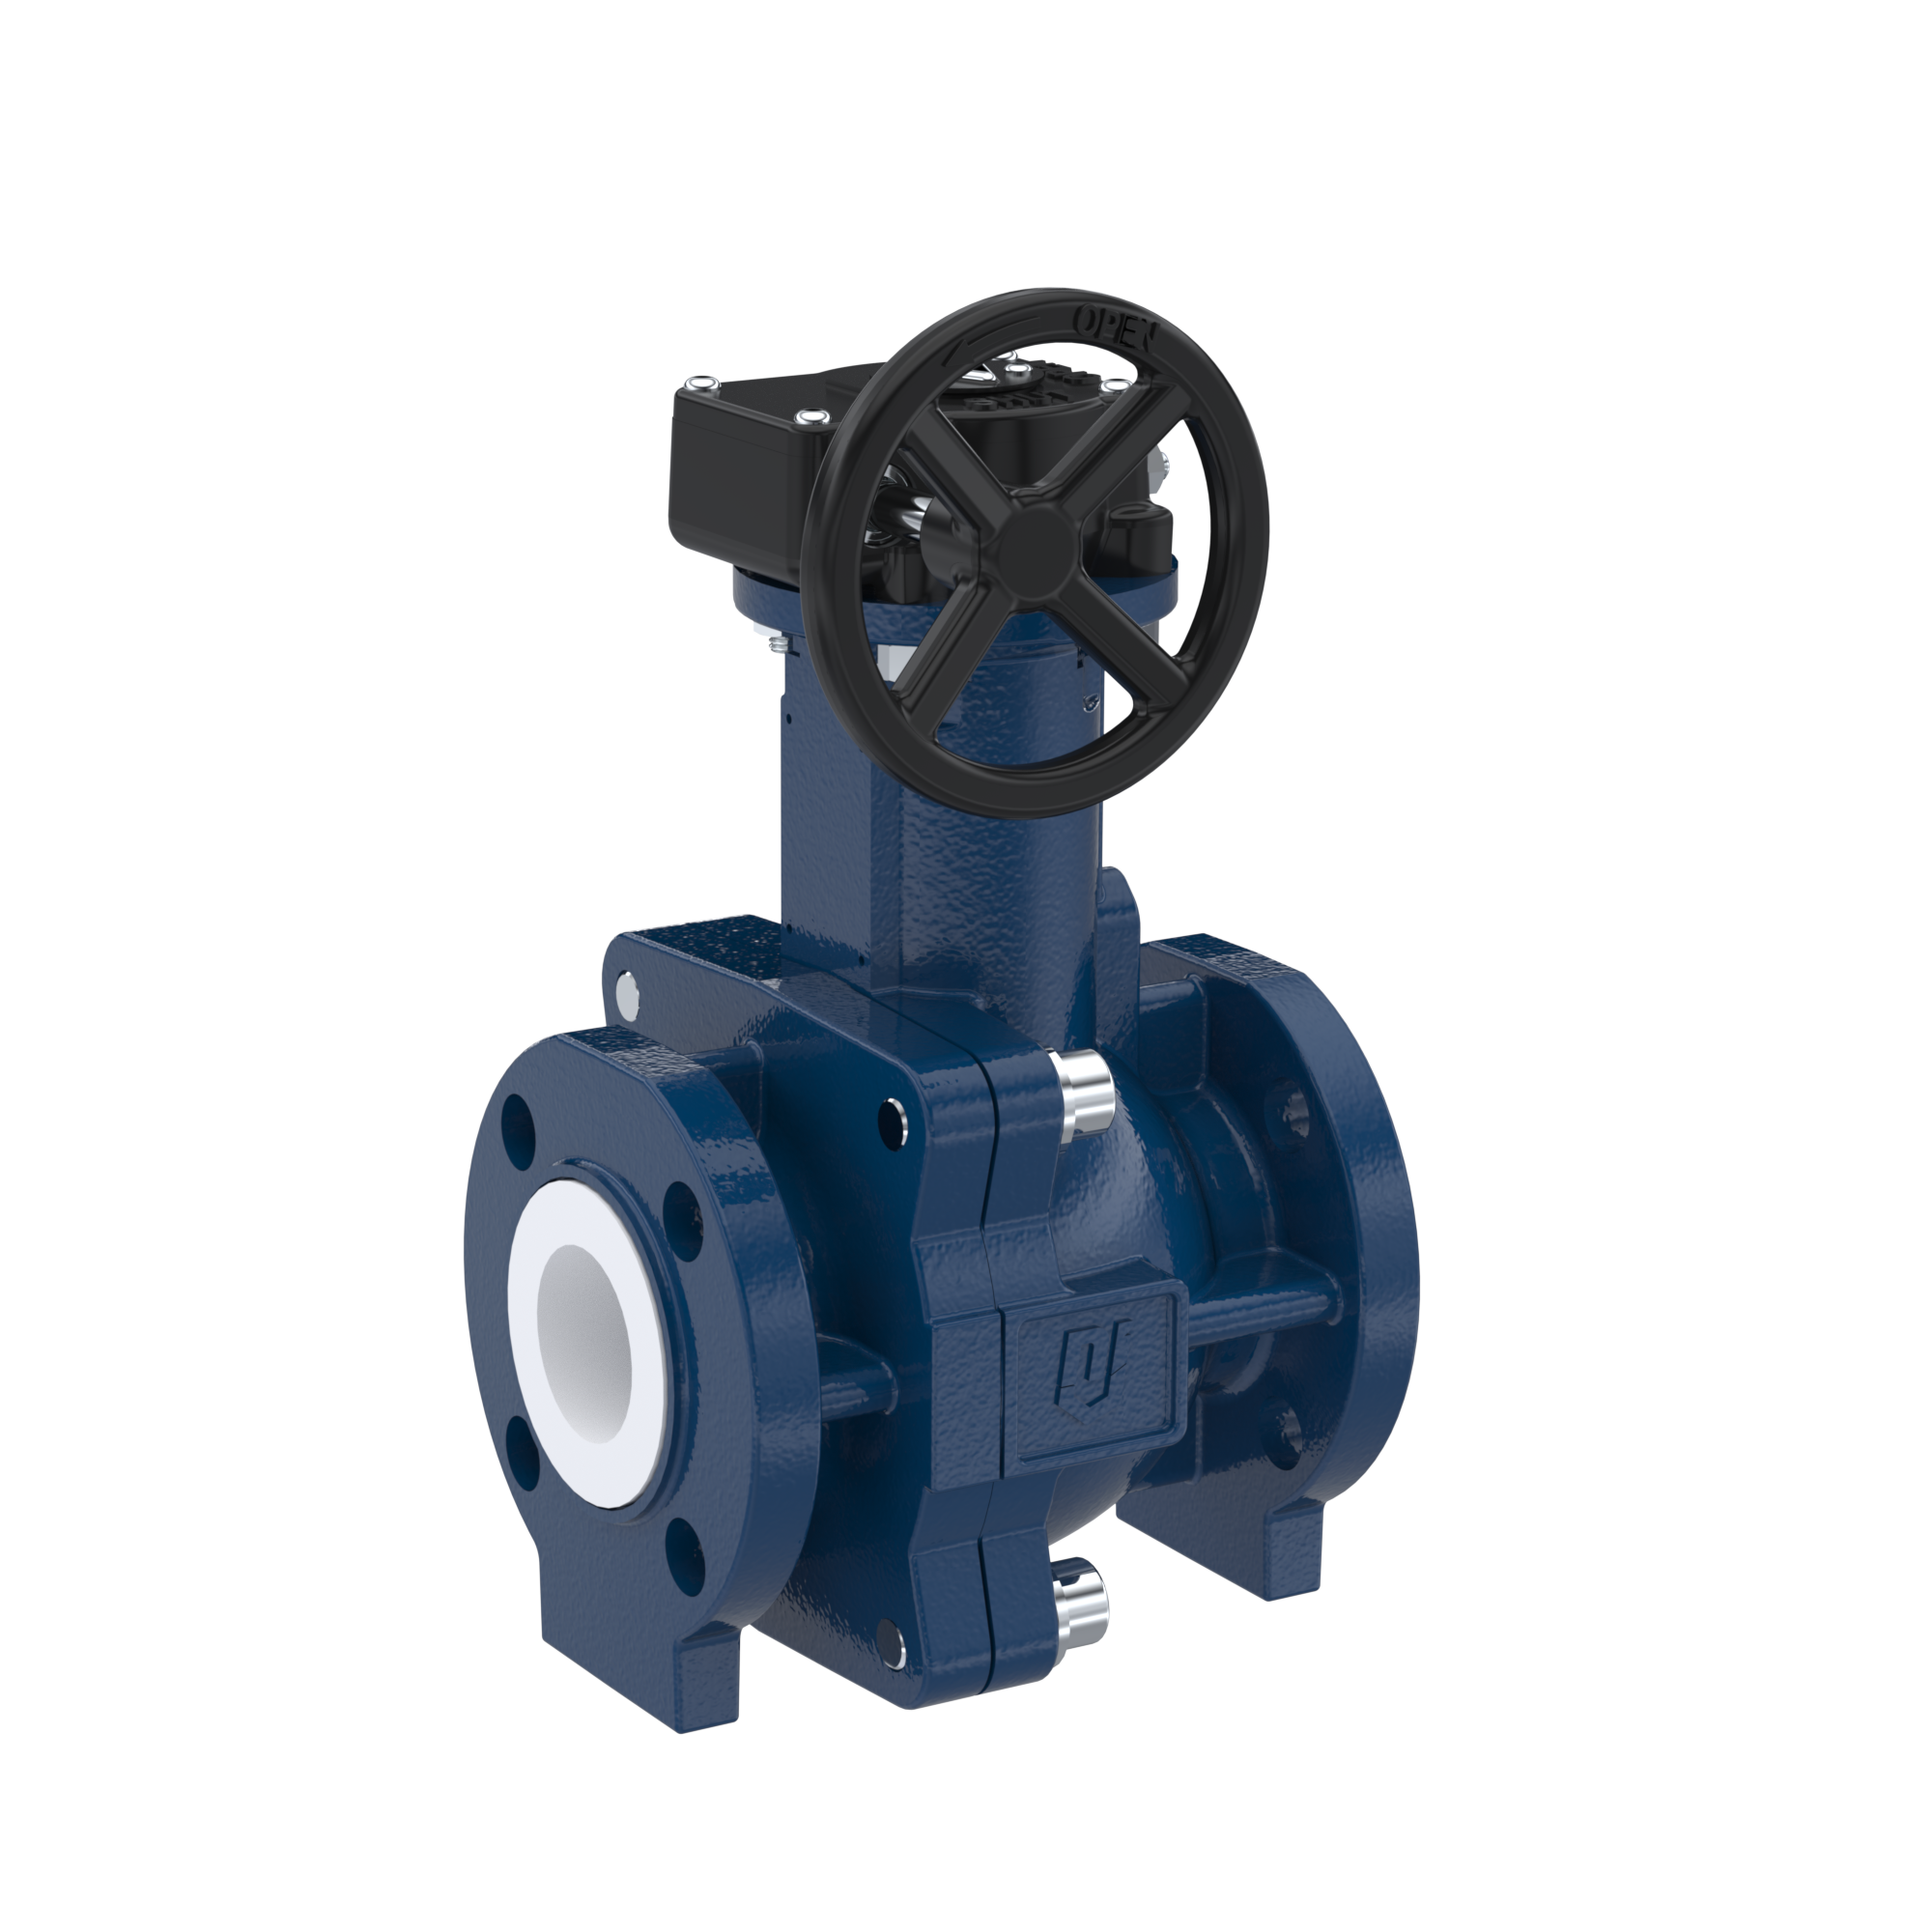 PFA-flange ball valve FK13 DN20 - 3/4" inch ANSI 150 made of spheroidal graphite cast iron with worm gear